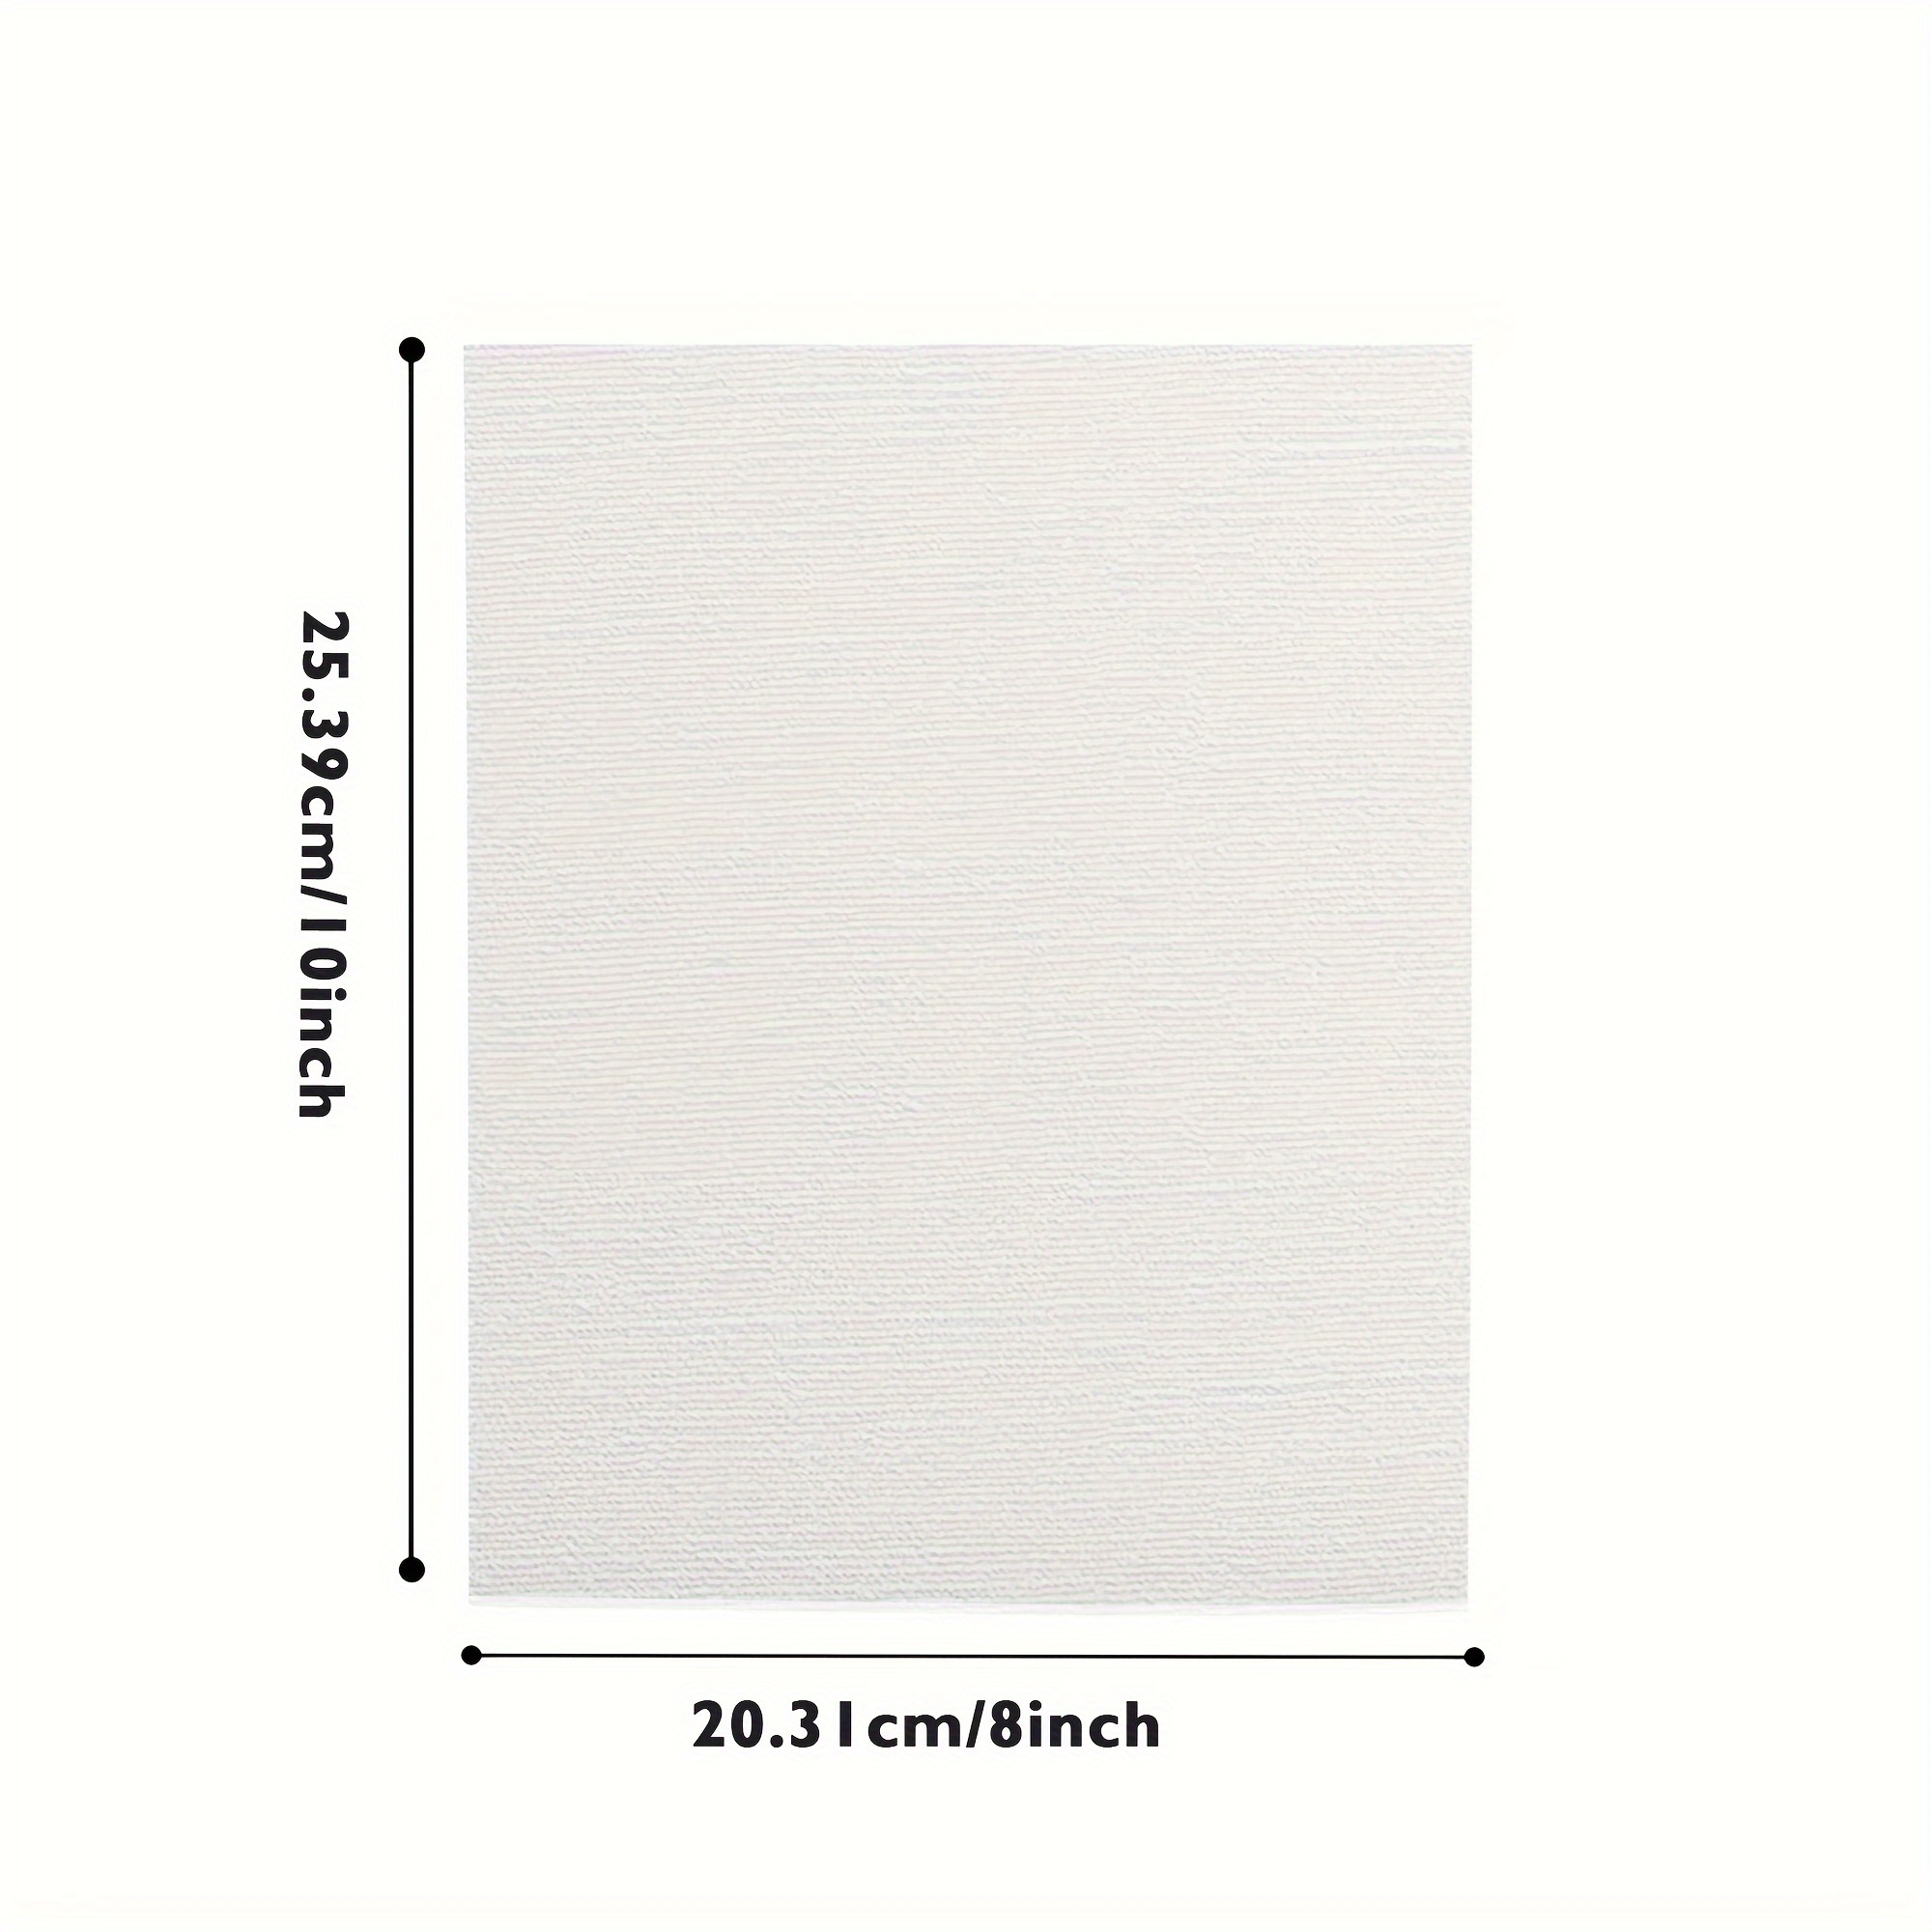 14pcs Artist Canvas Panels, 10x10 Inch Primed Artist Quality Acid Free  Canvas Board For Acrylic, Pouring Watercolor & Oil Painting, Back To School  Sup